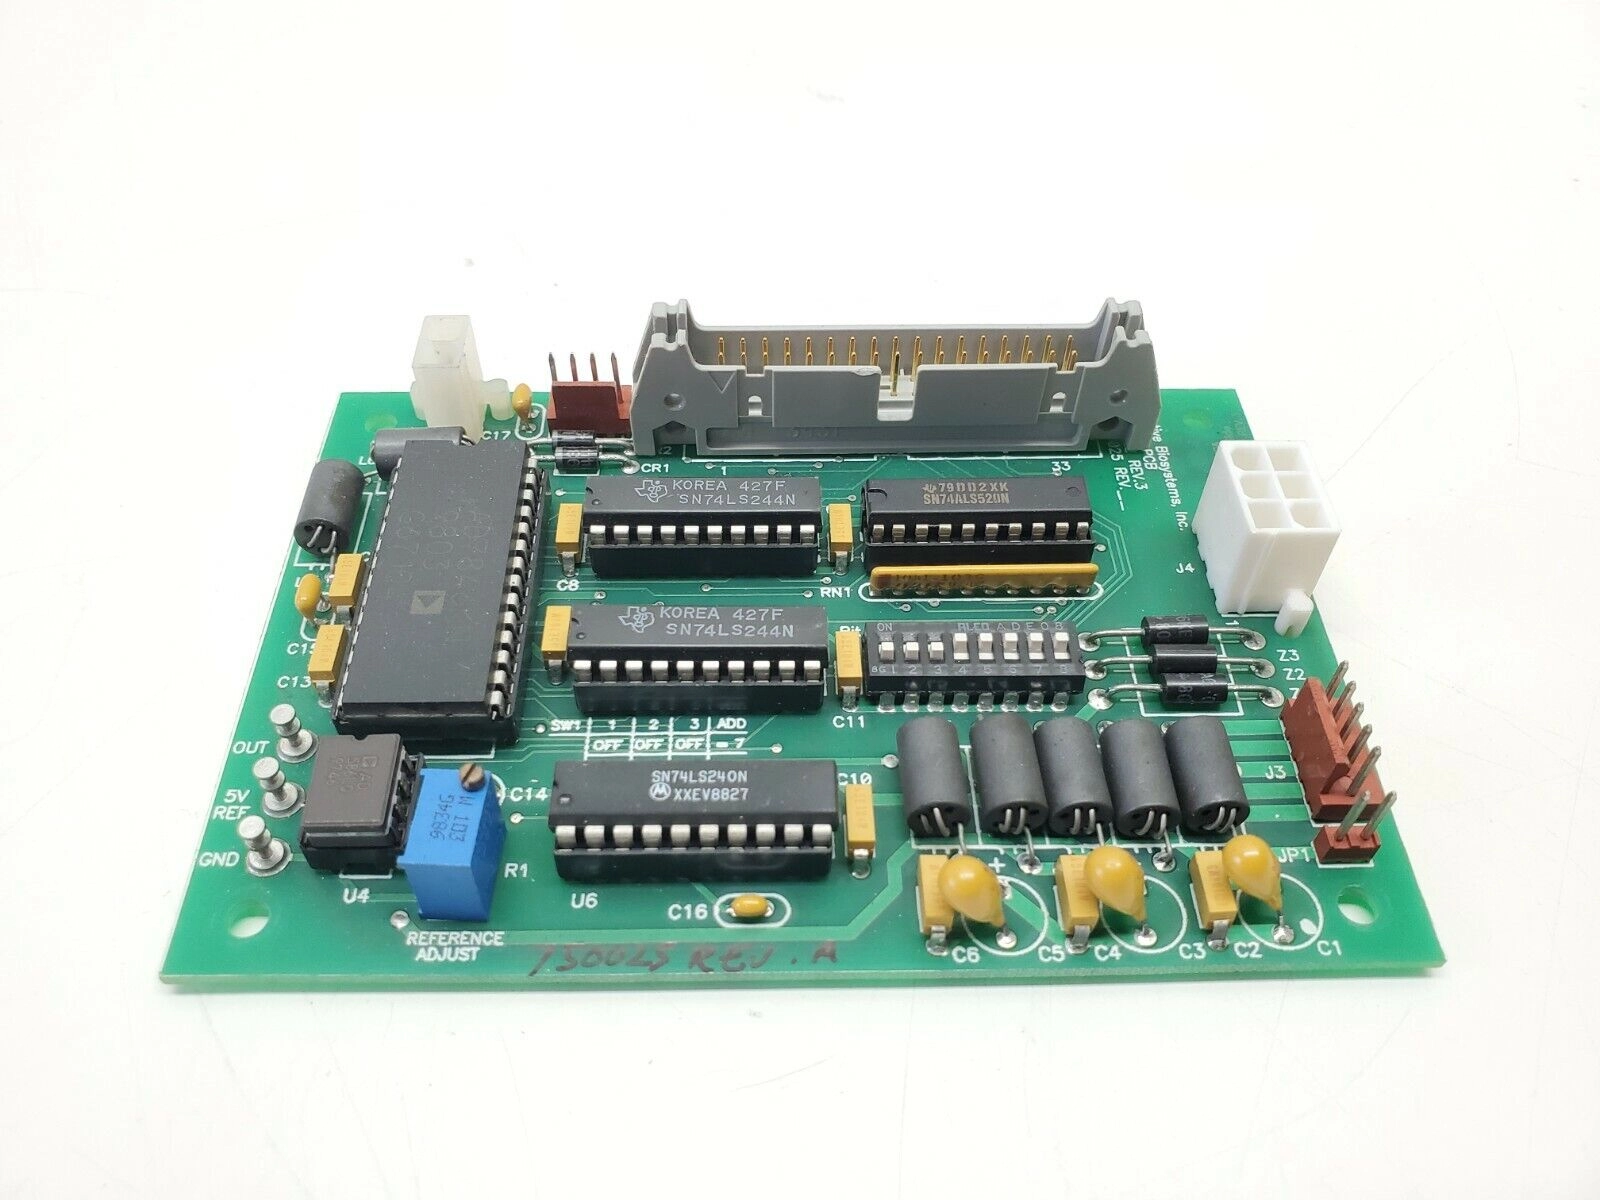 Perseptive Biosystems Voyager 16 Bit DAC PCB 10702